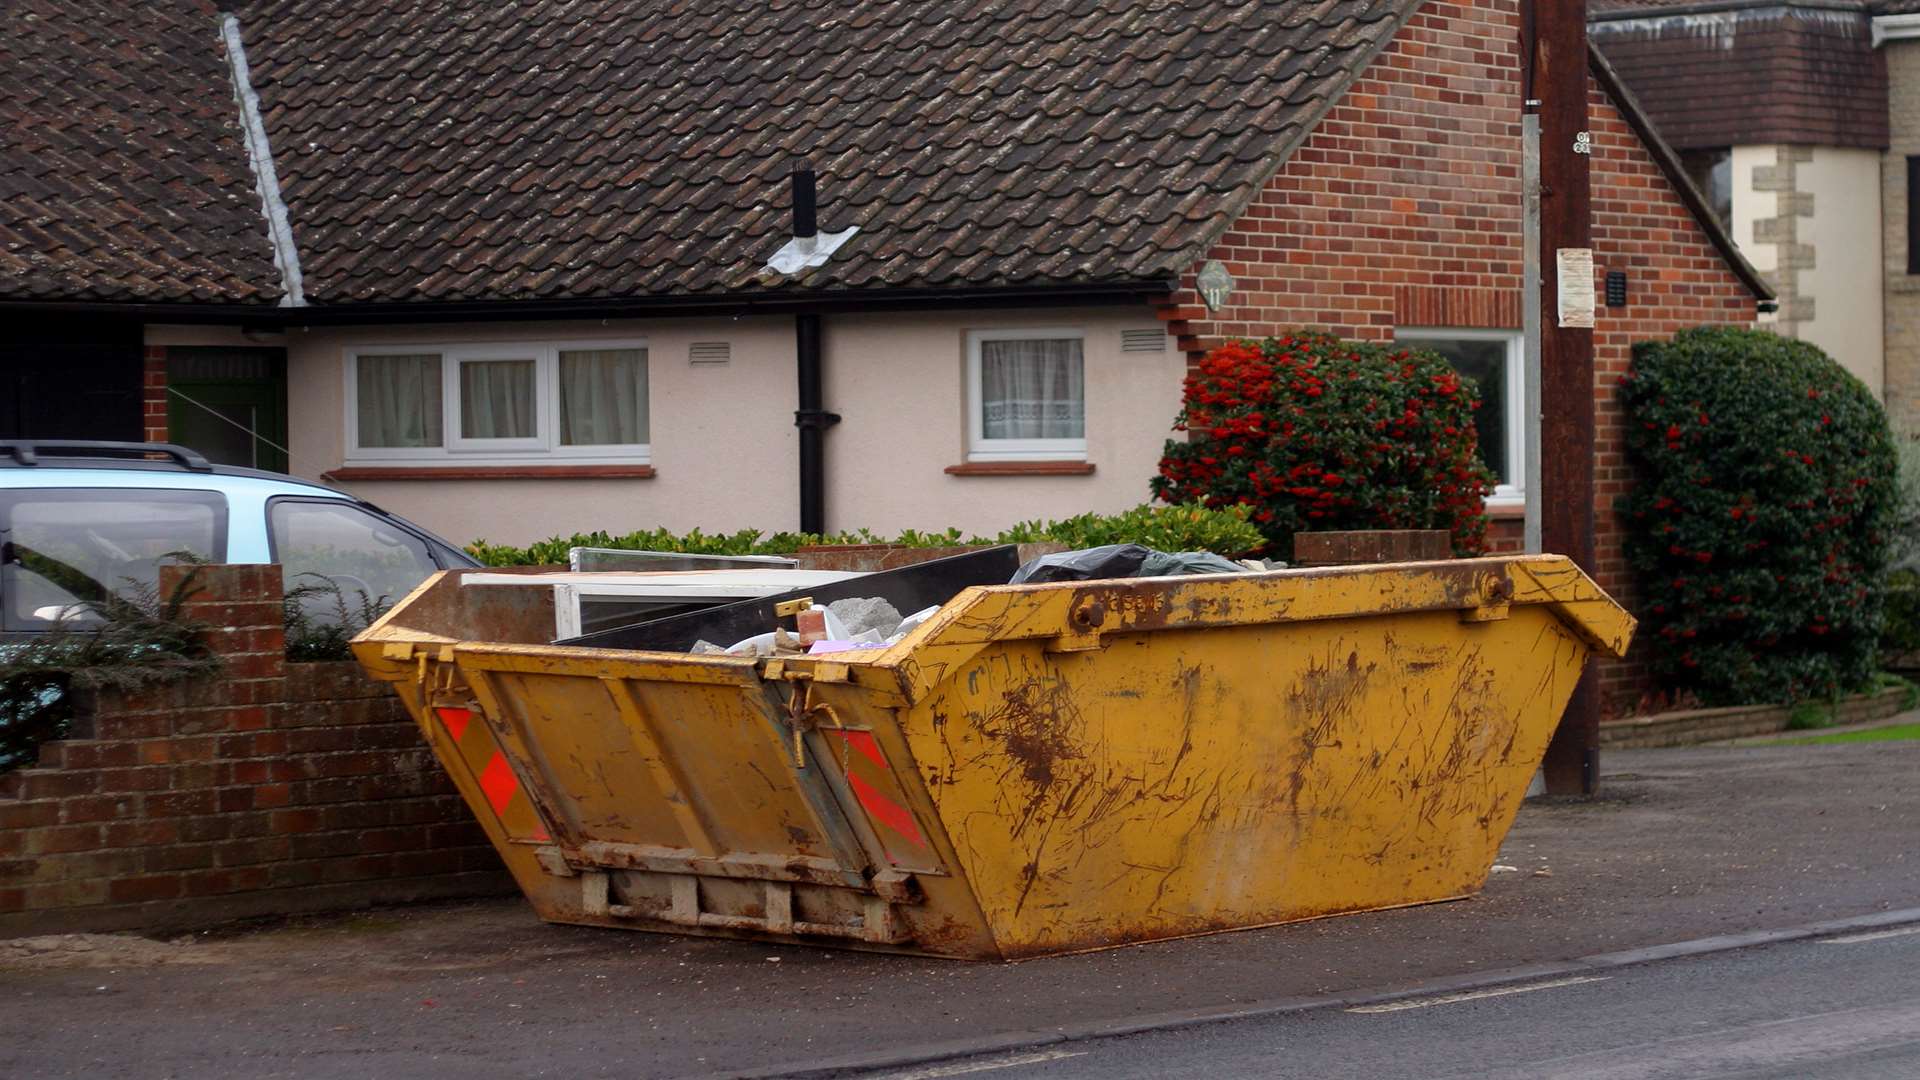 If you're intending to put your skip on the road or pavement you'll need to get council permission